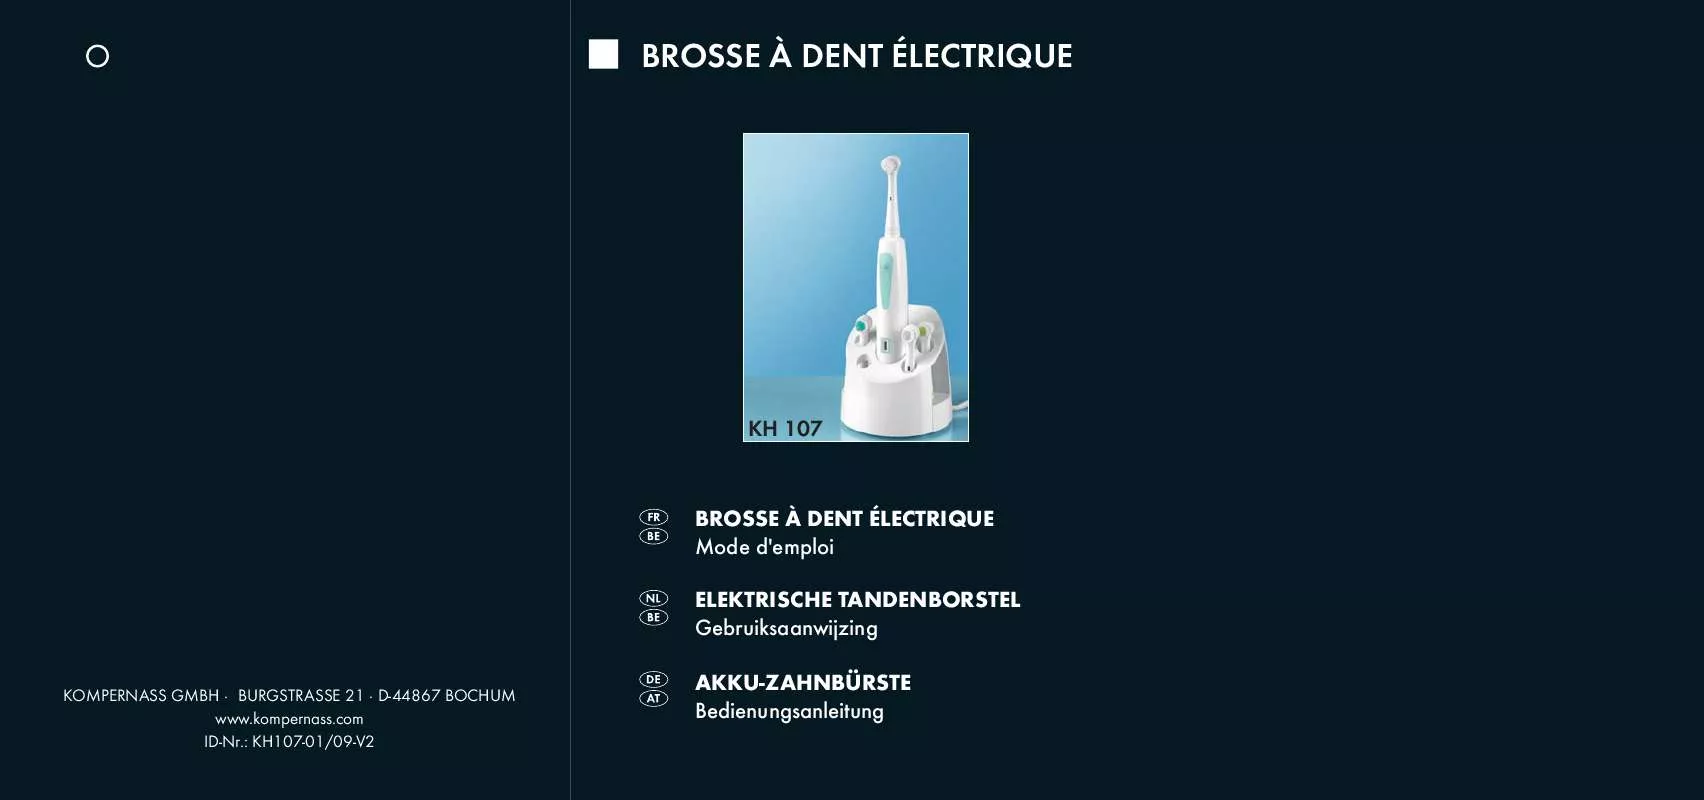 Mode d'emploi BALANCE KH 107 RECHARGEABLE ELECTRIC TOOTHBRUSH